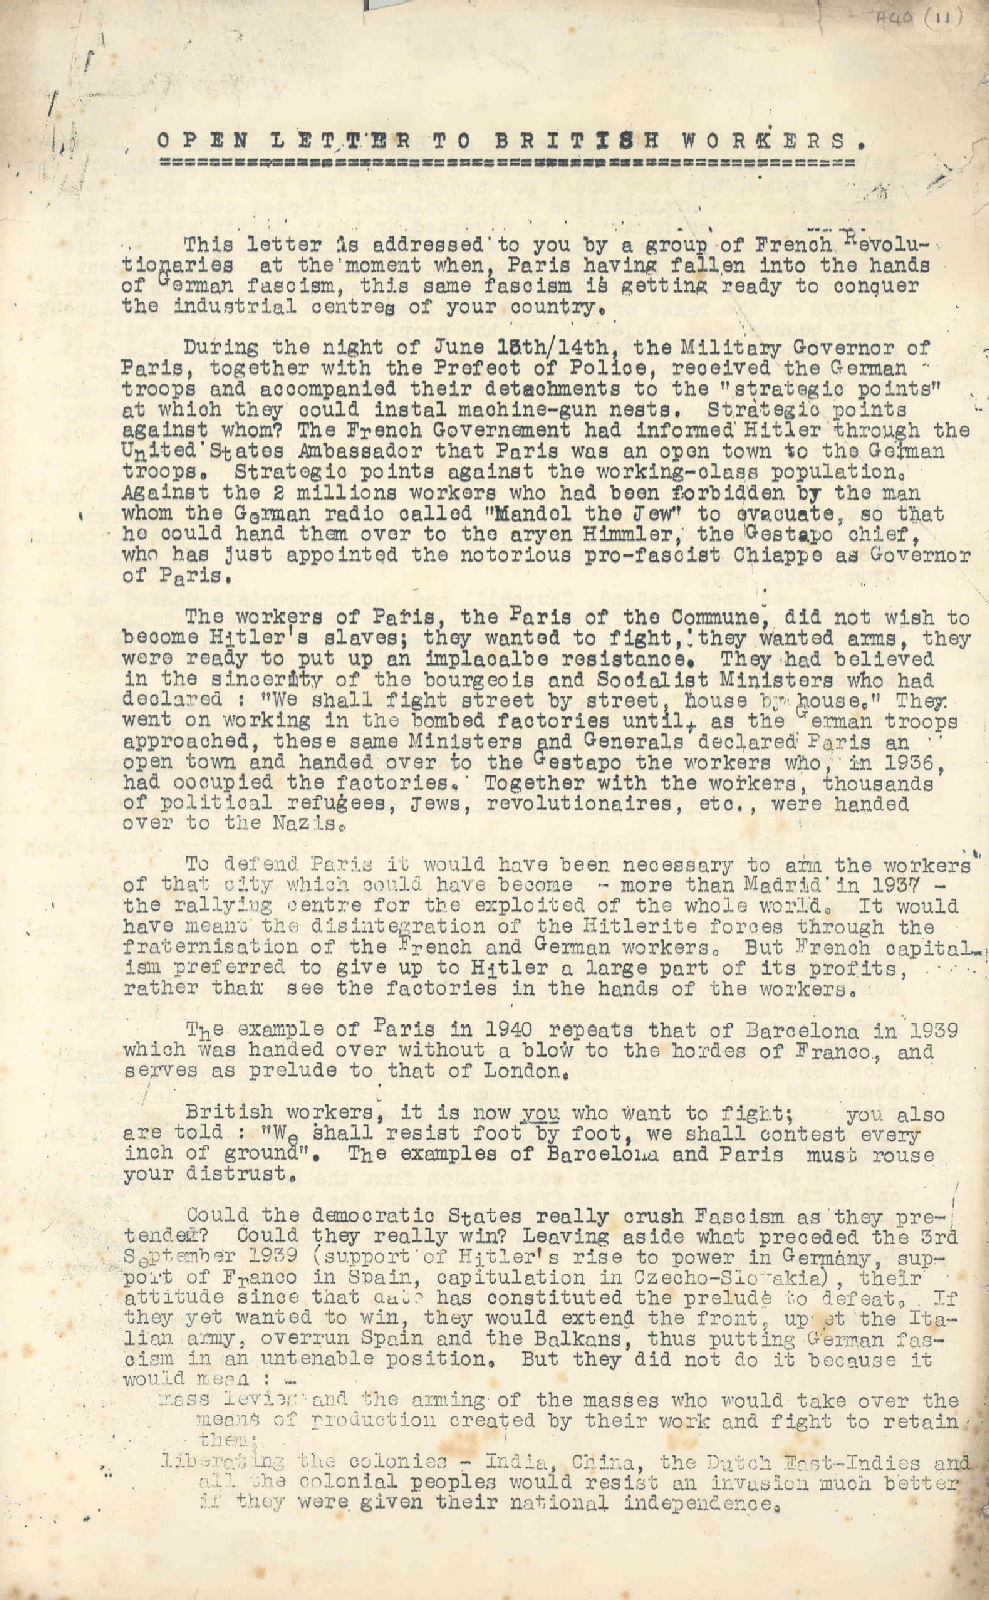 'Open letter to British workers', 17 June 1940